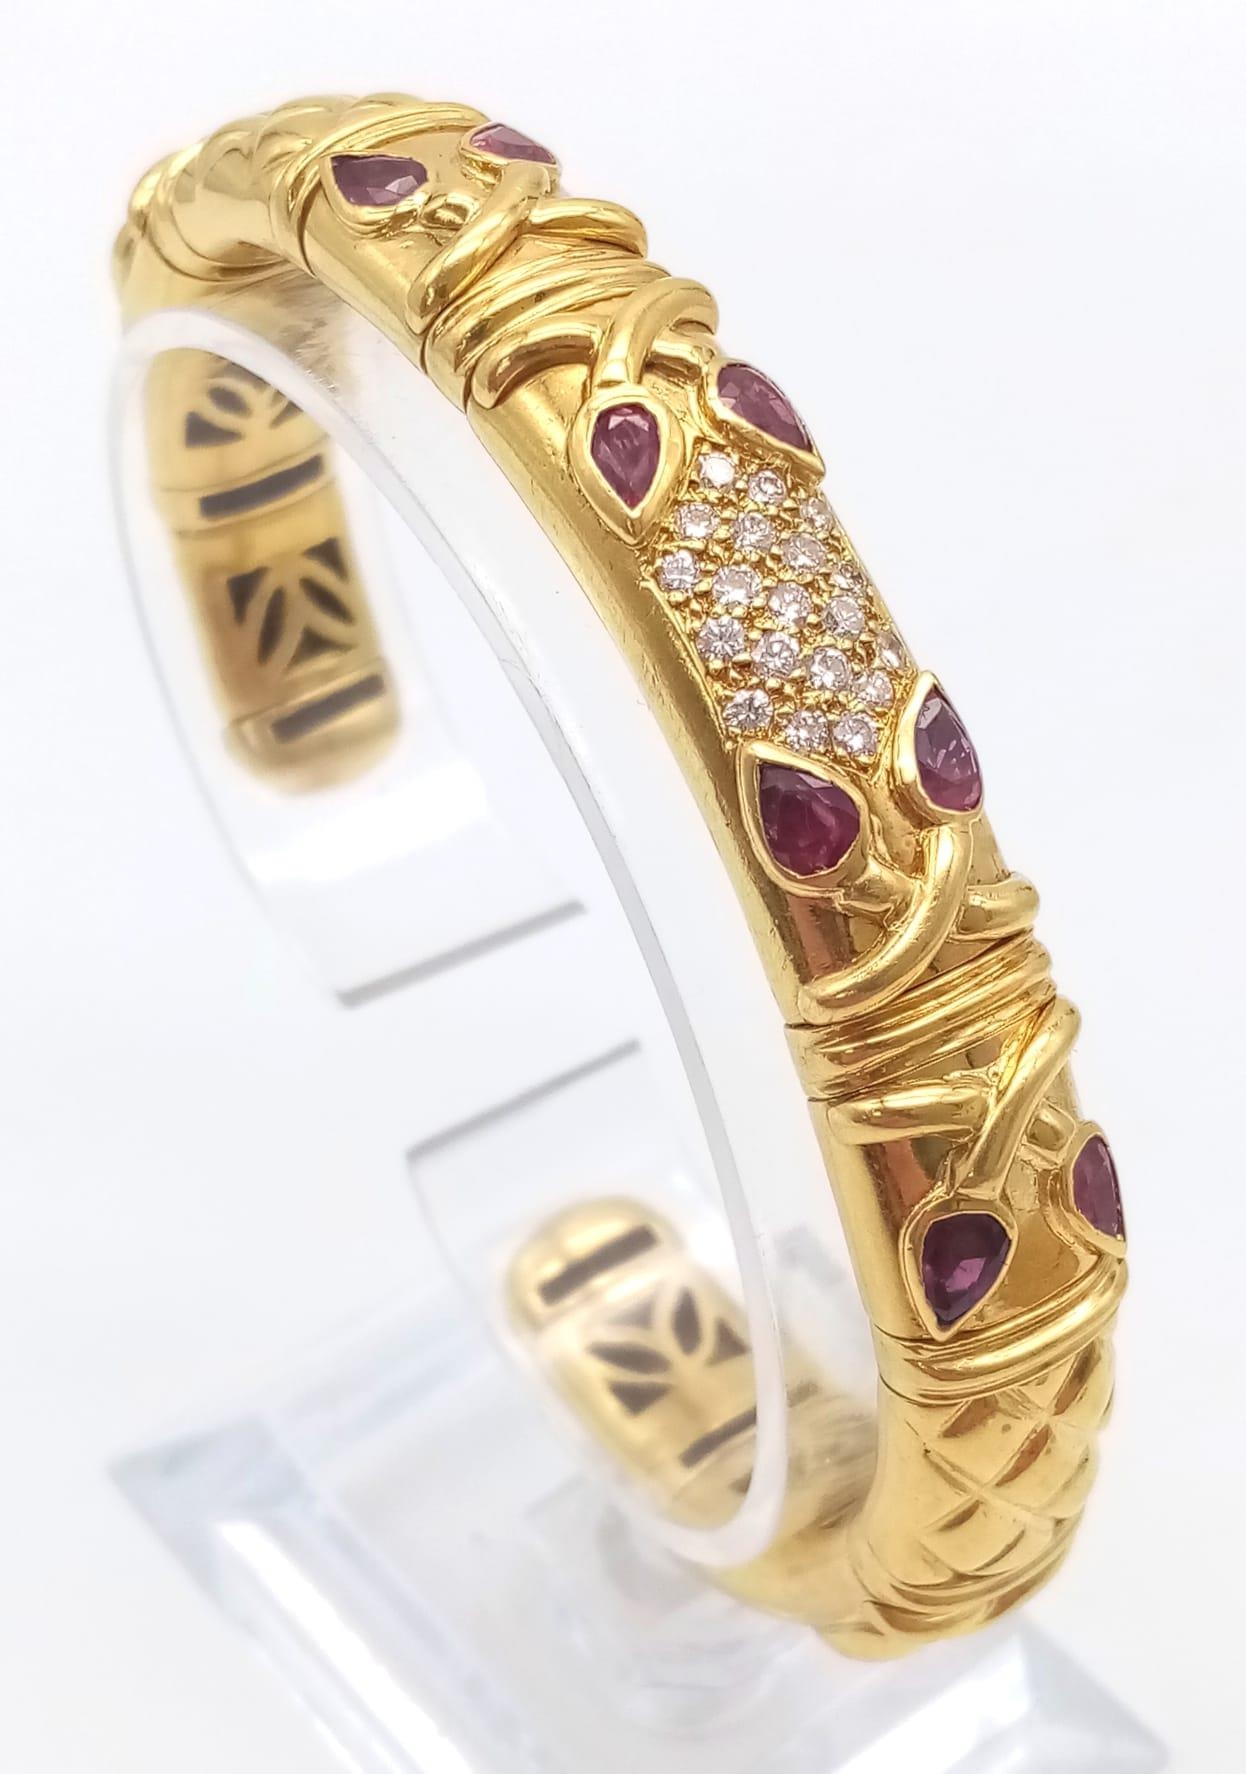 AN 18K GOLD STUNNING INNER PIERCED BANGLE WITH BEAUTIFUL OUTER WORK AND DECORATED WITH DIAMONDS - Image 5 of 6